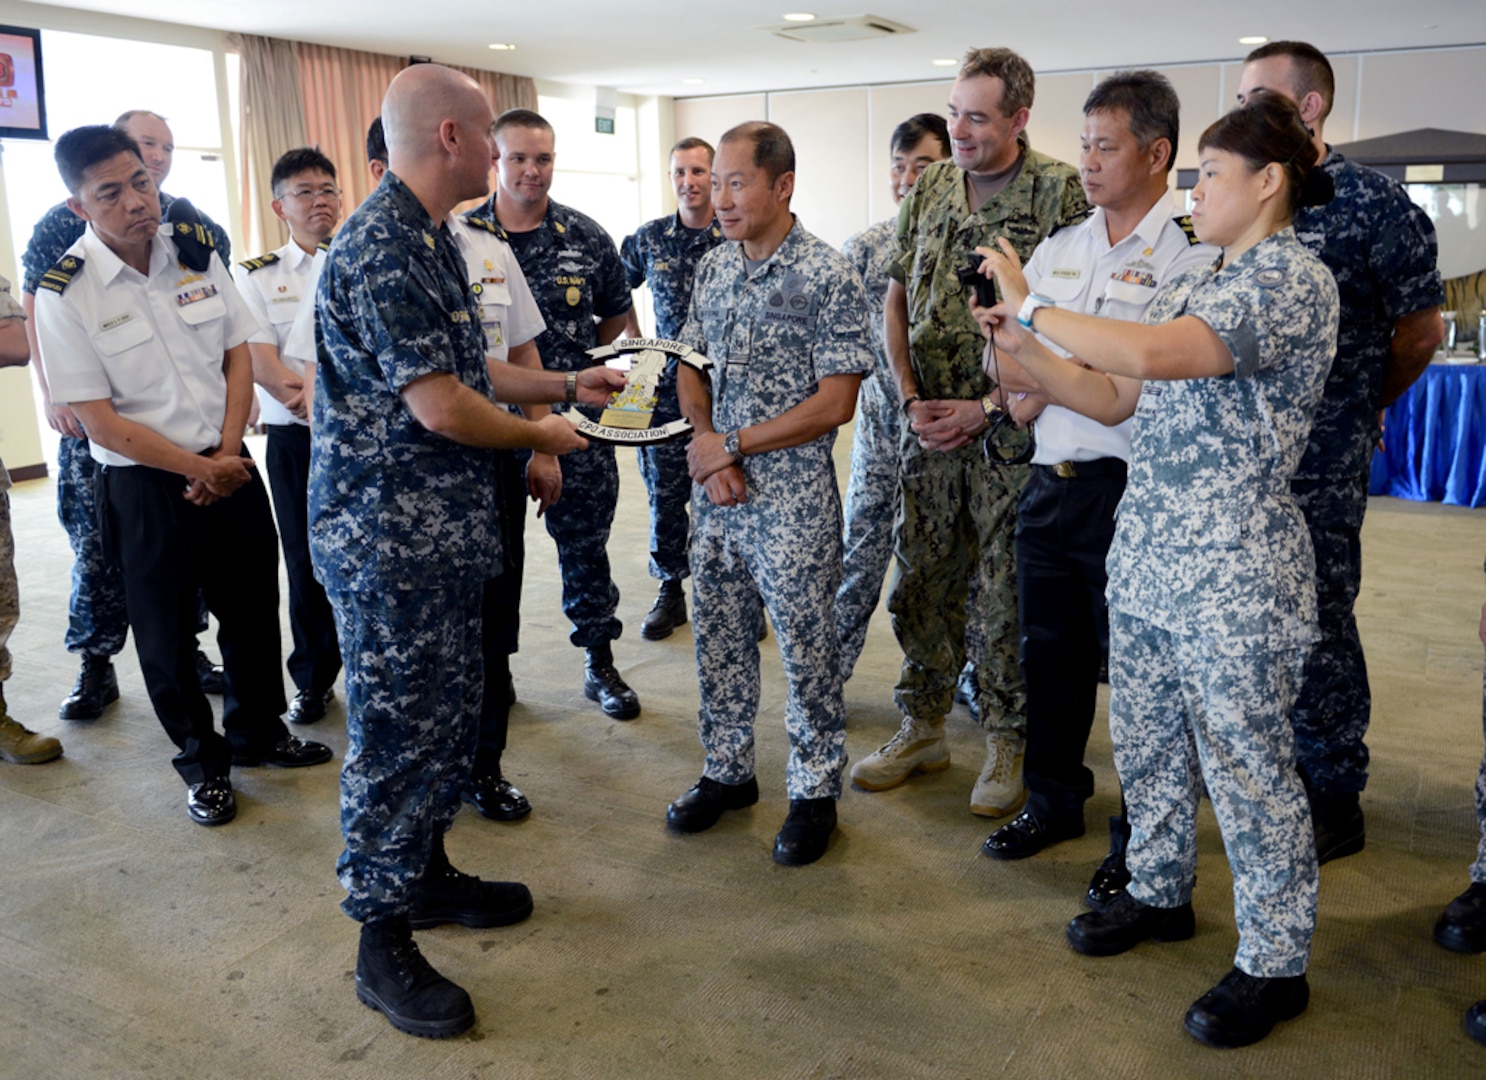 SINGAPORE (Apr. 16, 2015) - Commander, Task Force 73 Command Master Chief Richard O'Rawe presents Republic of Singapore Master Chief Petty Officer of the Navy (MCPON) Military Expert (ME) 6 Phui Peng Sim a plaque from the U.S. Navy Chief Petty Officer's Association of Singapore.  The U.S. and Republic of Singapore navies held a Senior Enlisted Leadership Exchange. 